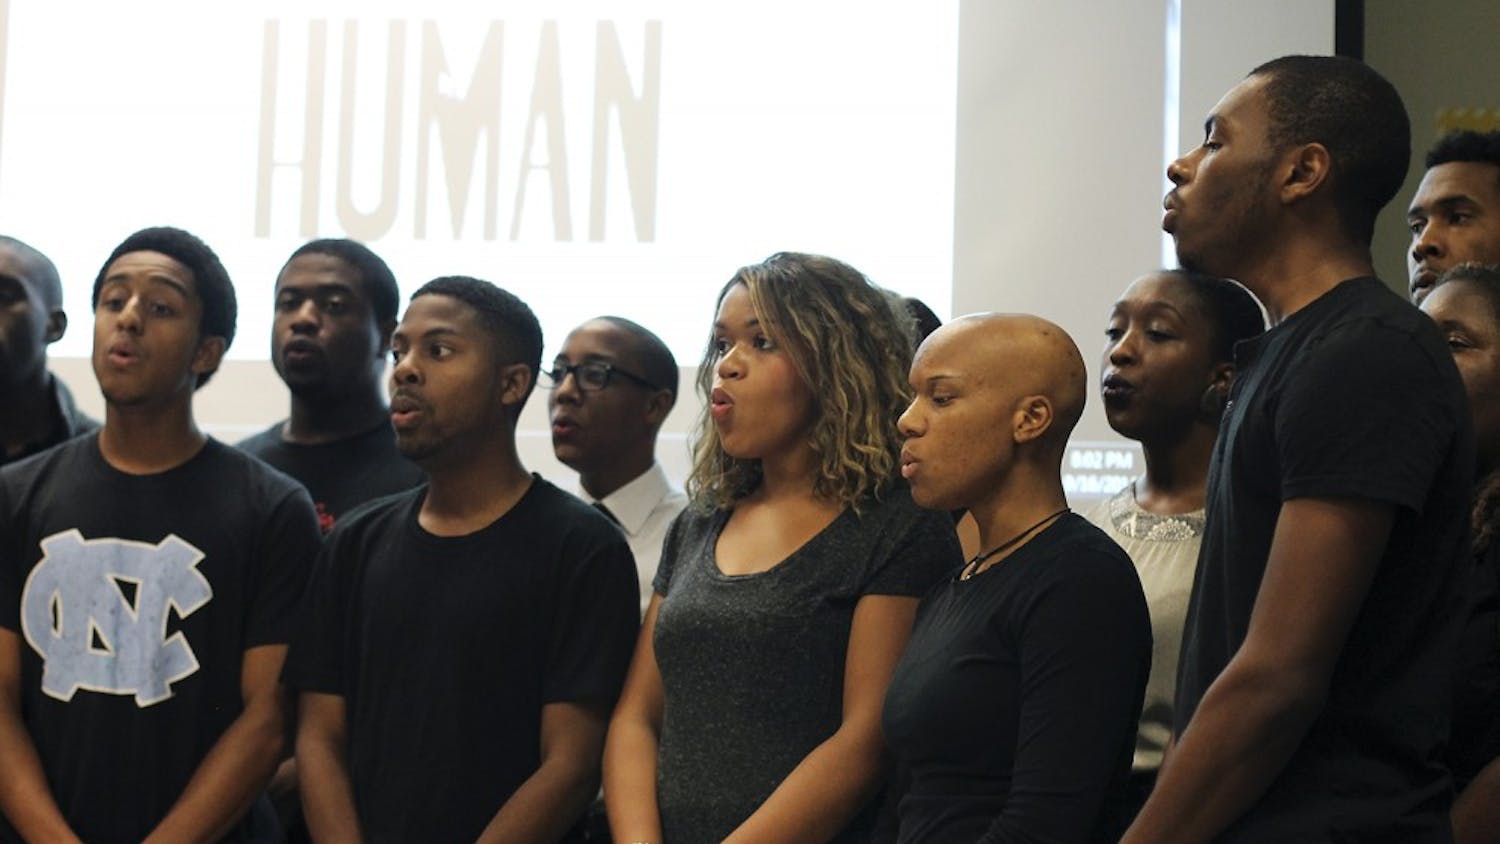 The UNC chapter of the NAACP and the Xi Gamma chapter of Phi Beta Sigma Fraternity hosted "I Am A Human", a panel that discussed recent minority injustices and possible strategic solutions featured the UNC Harmonyx on Tuesday evening.